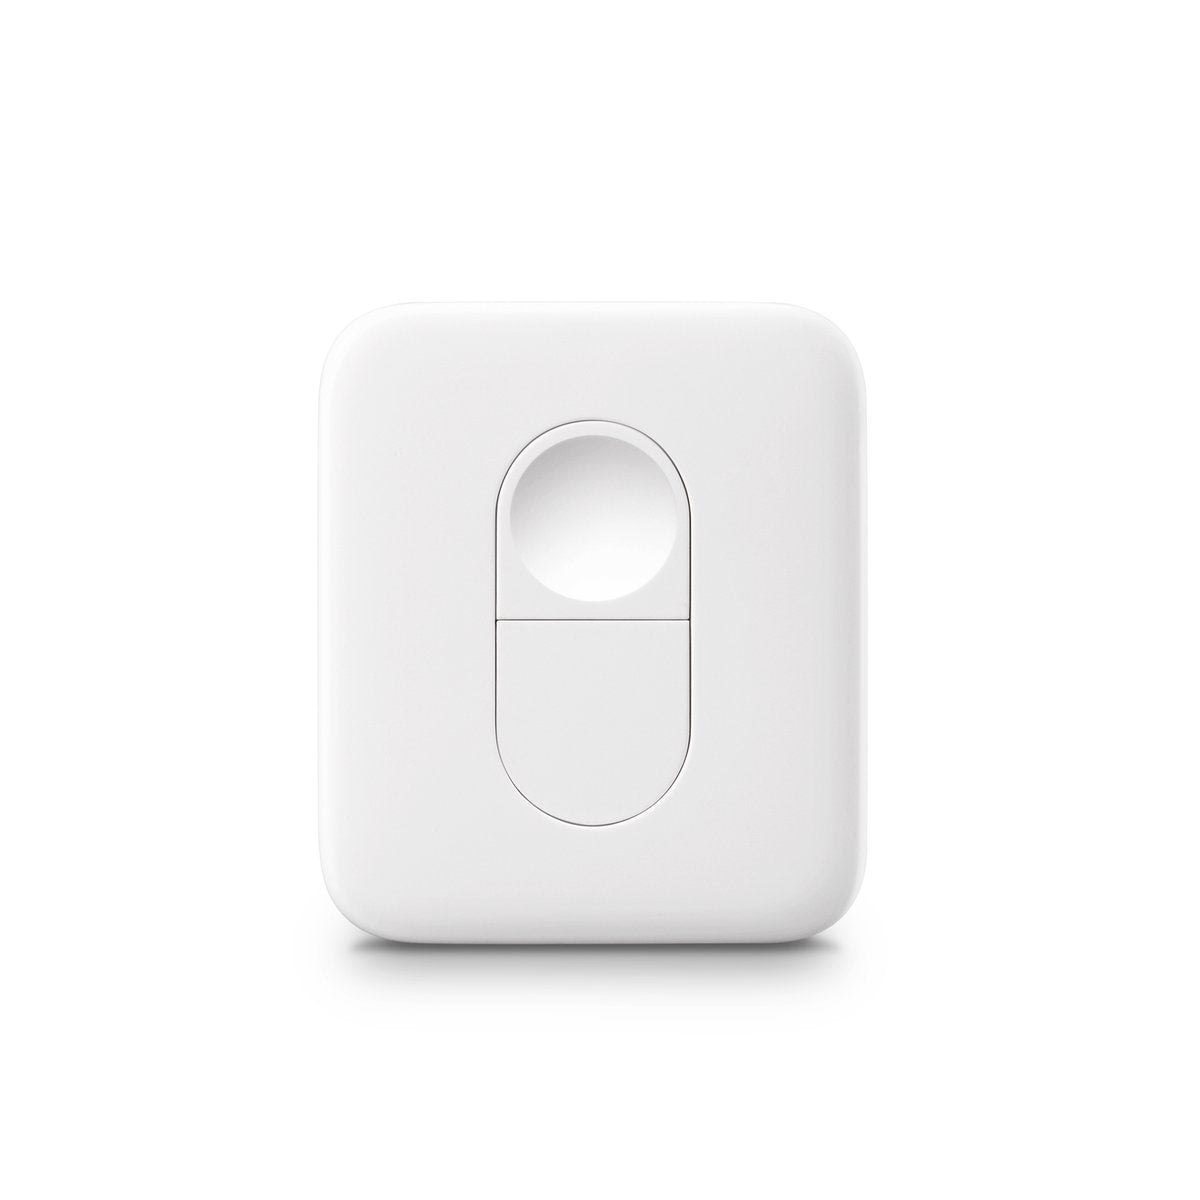 SwitchBot Remote One Touch Button - Store 974 | ستور ٩٧٤